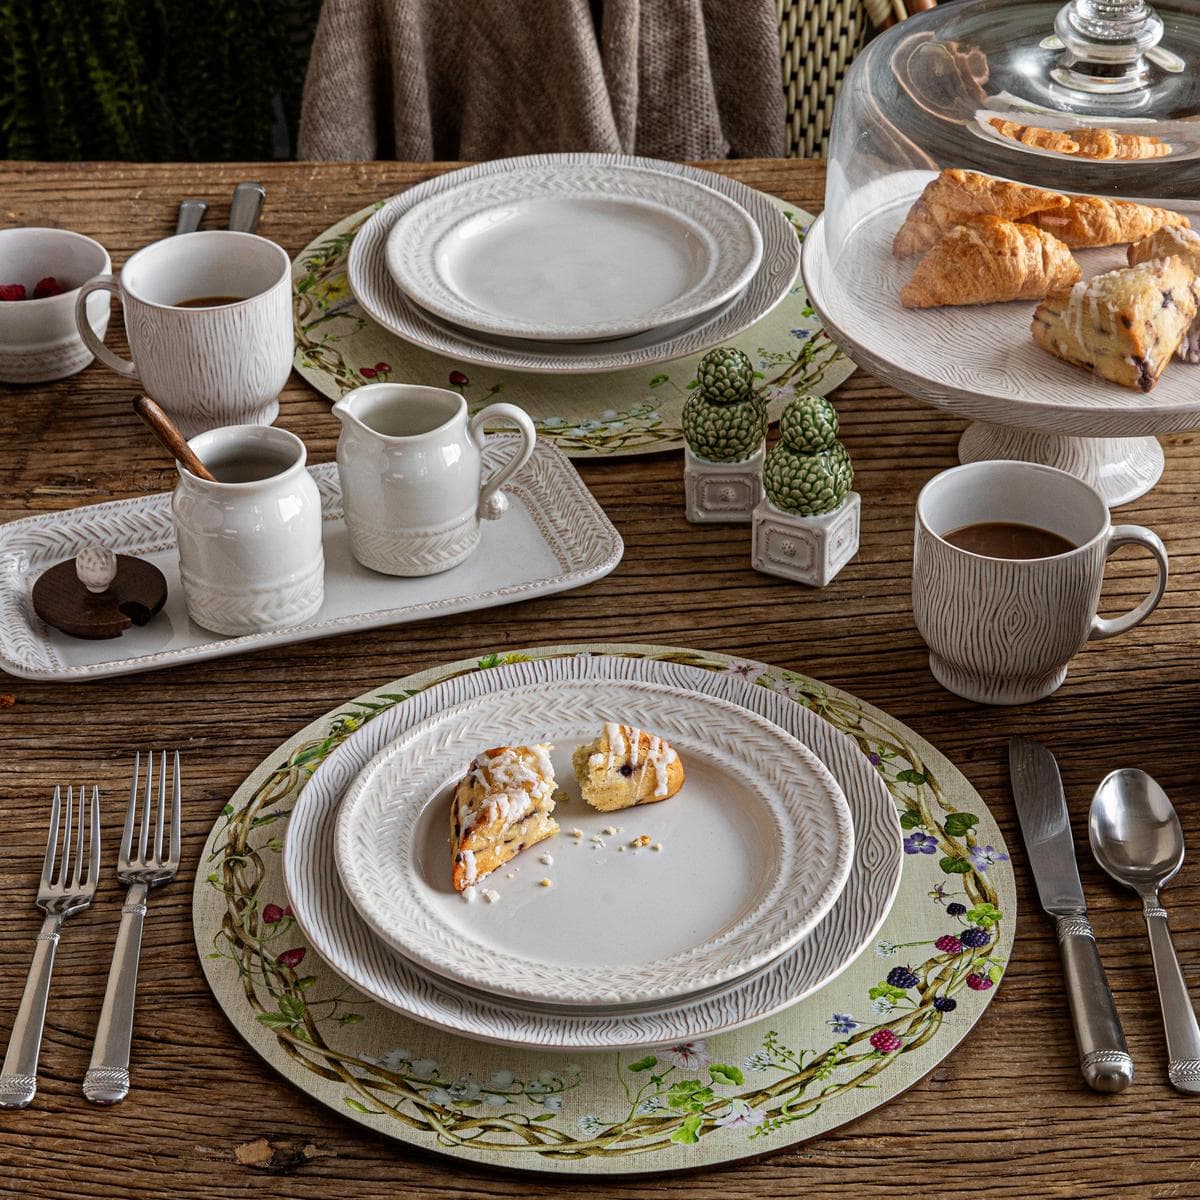 Le Panier Whitewash and Blenheim Oak mix and match to set a beautiful morning table.